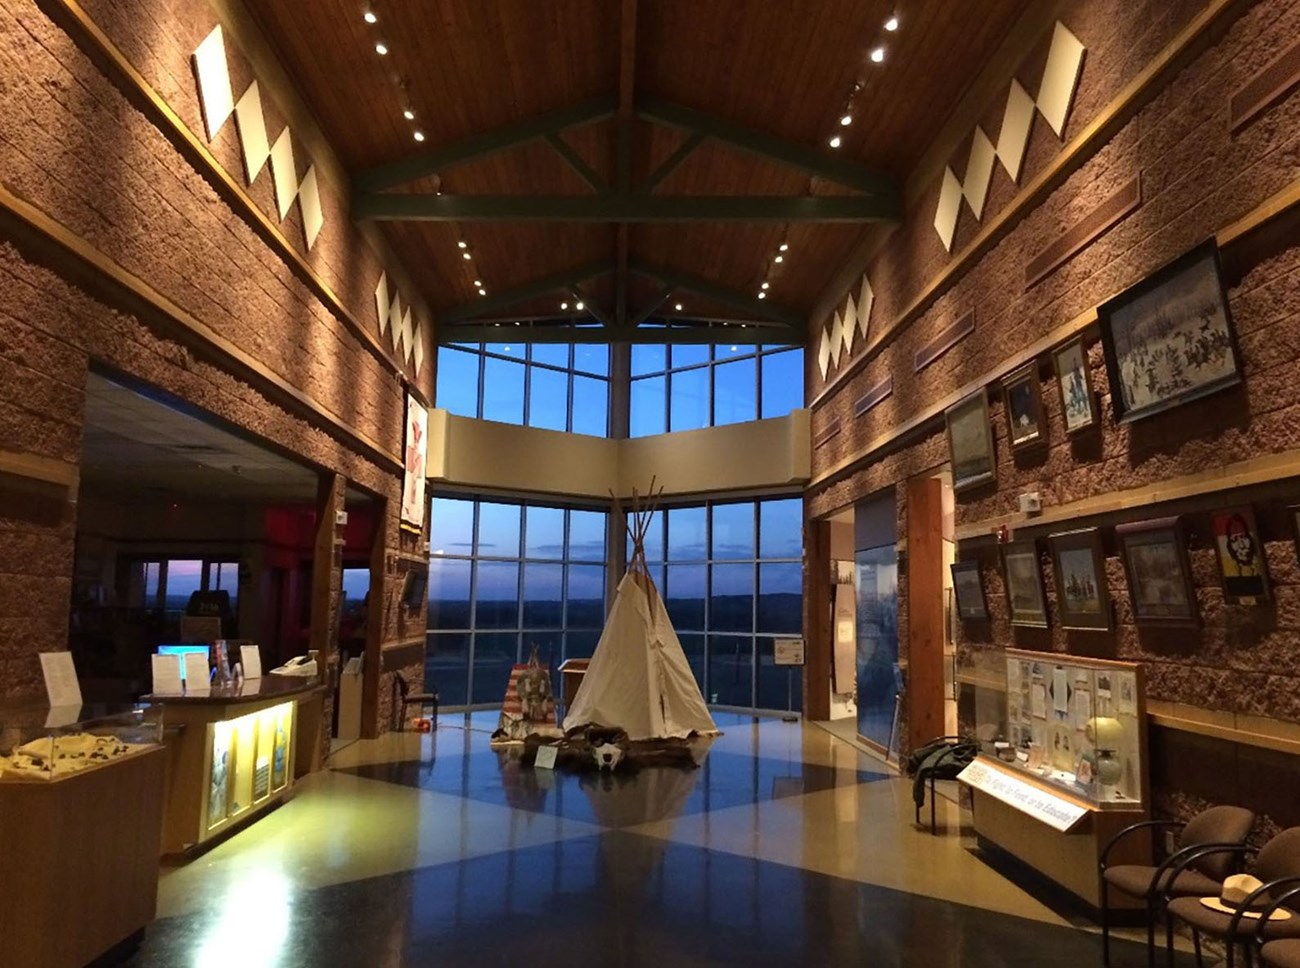 Inside a long building with a tipi at the end in front of a large window.